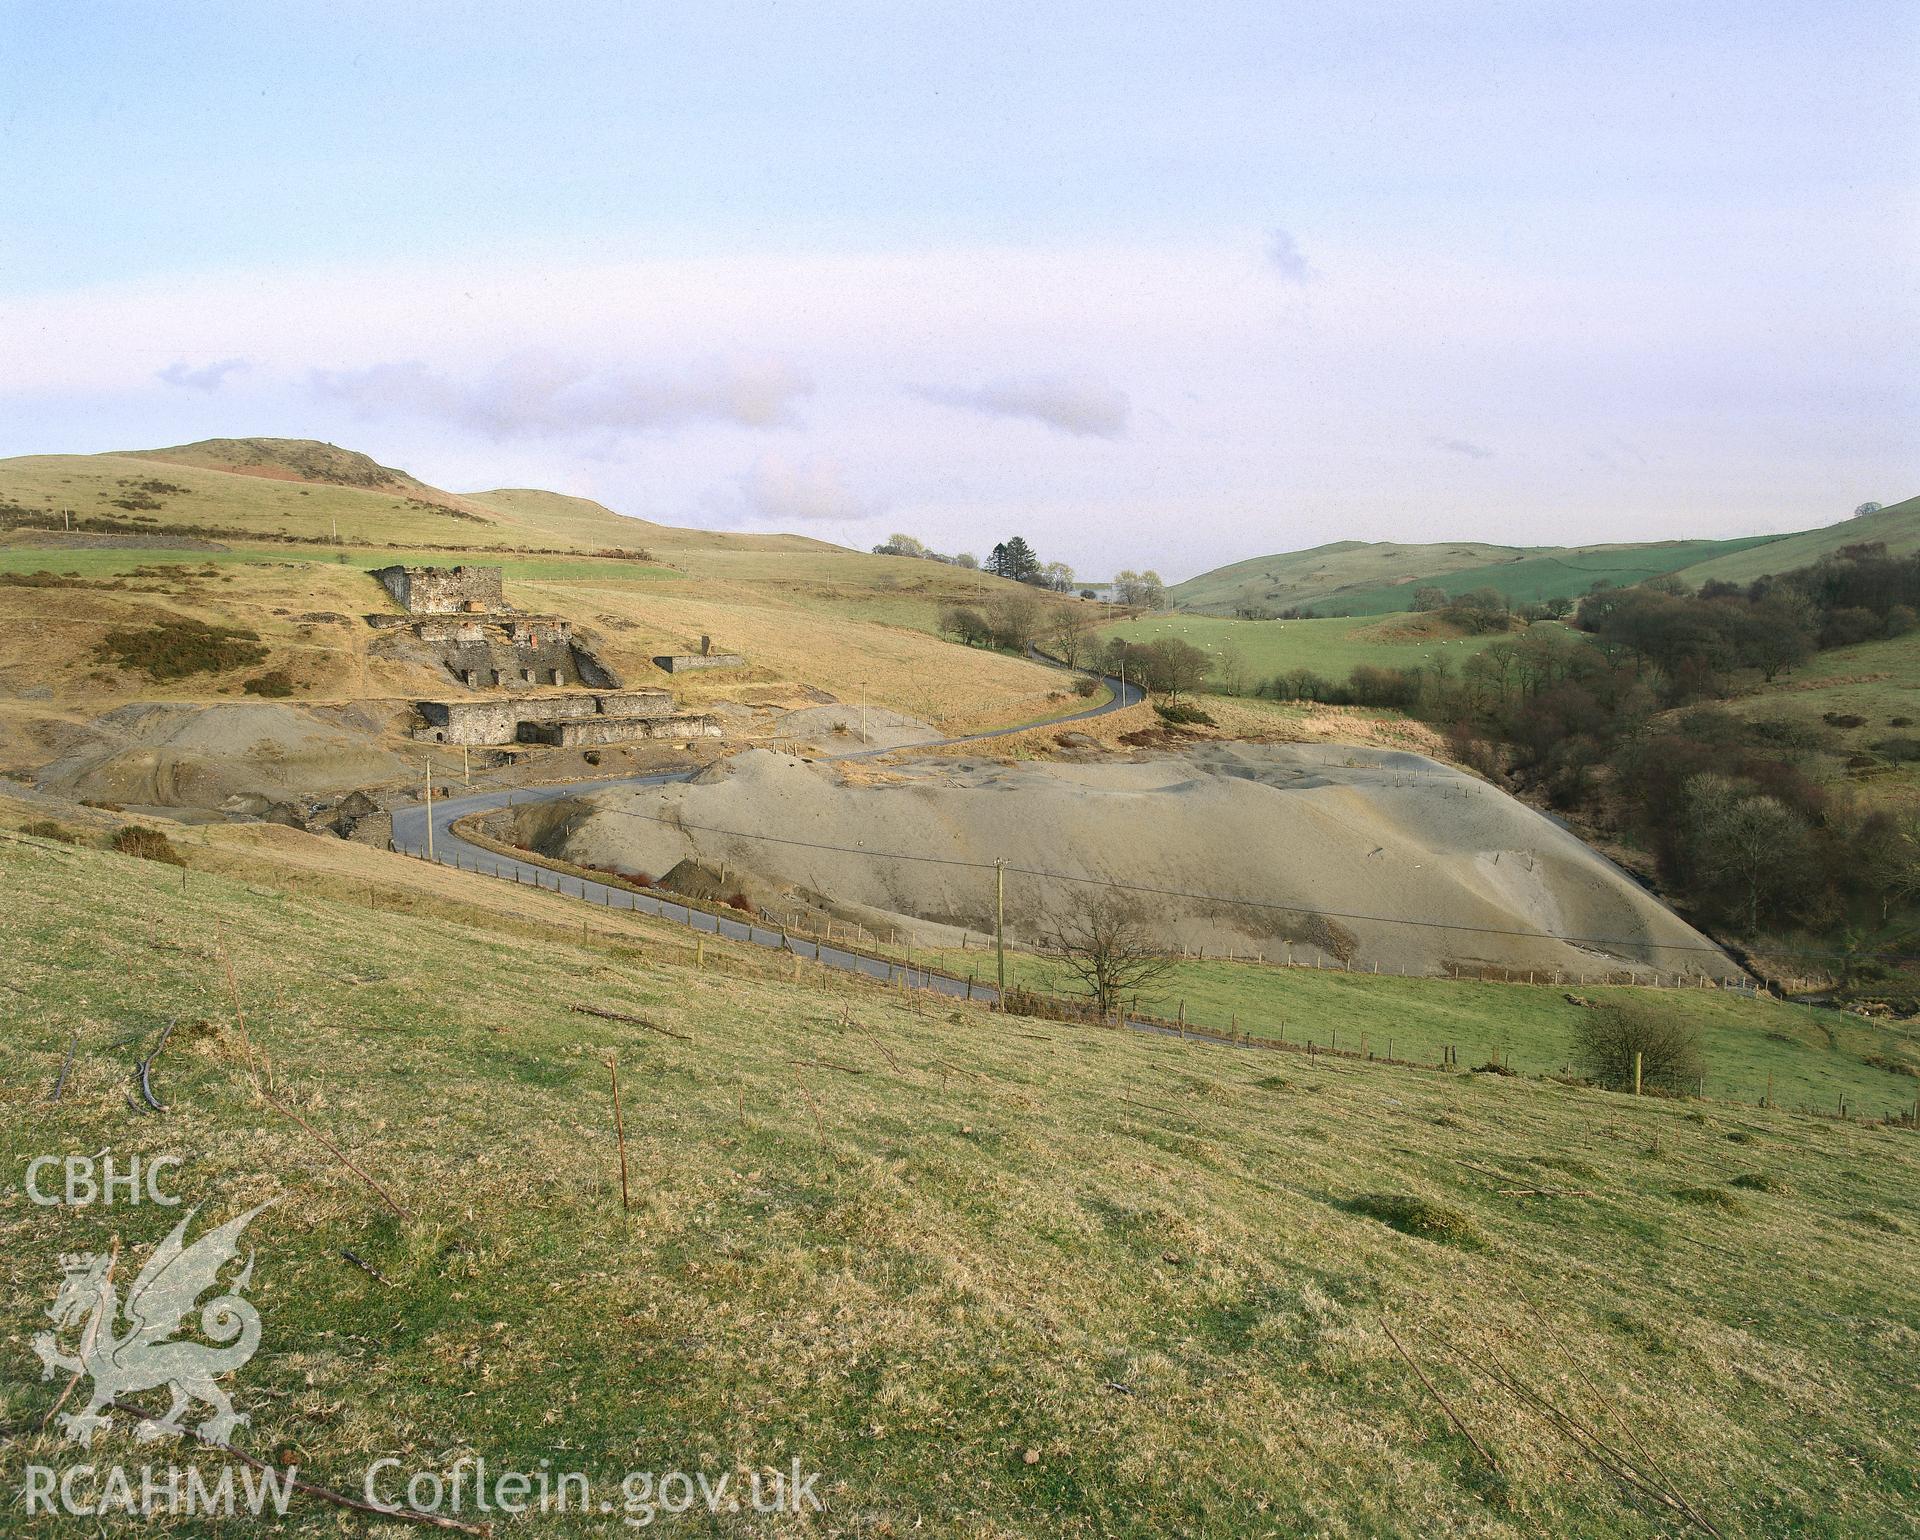 RCAHMW colour transparency showing view of Frongoch Lead Mines, Ceredigion.